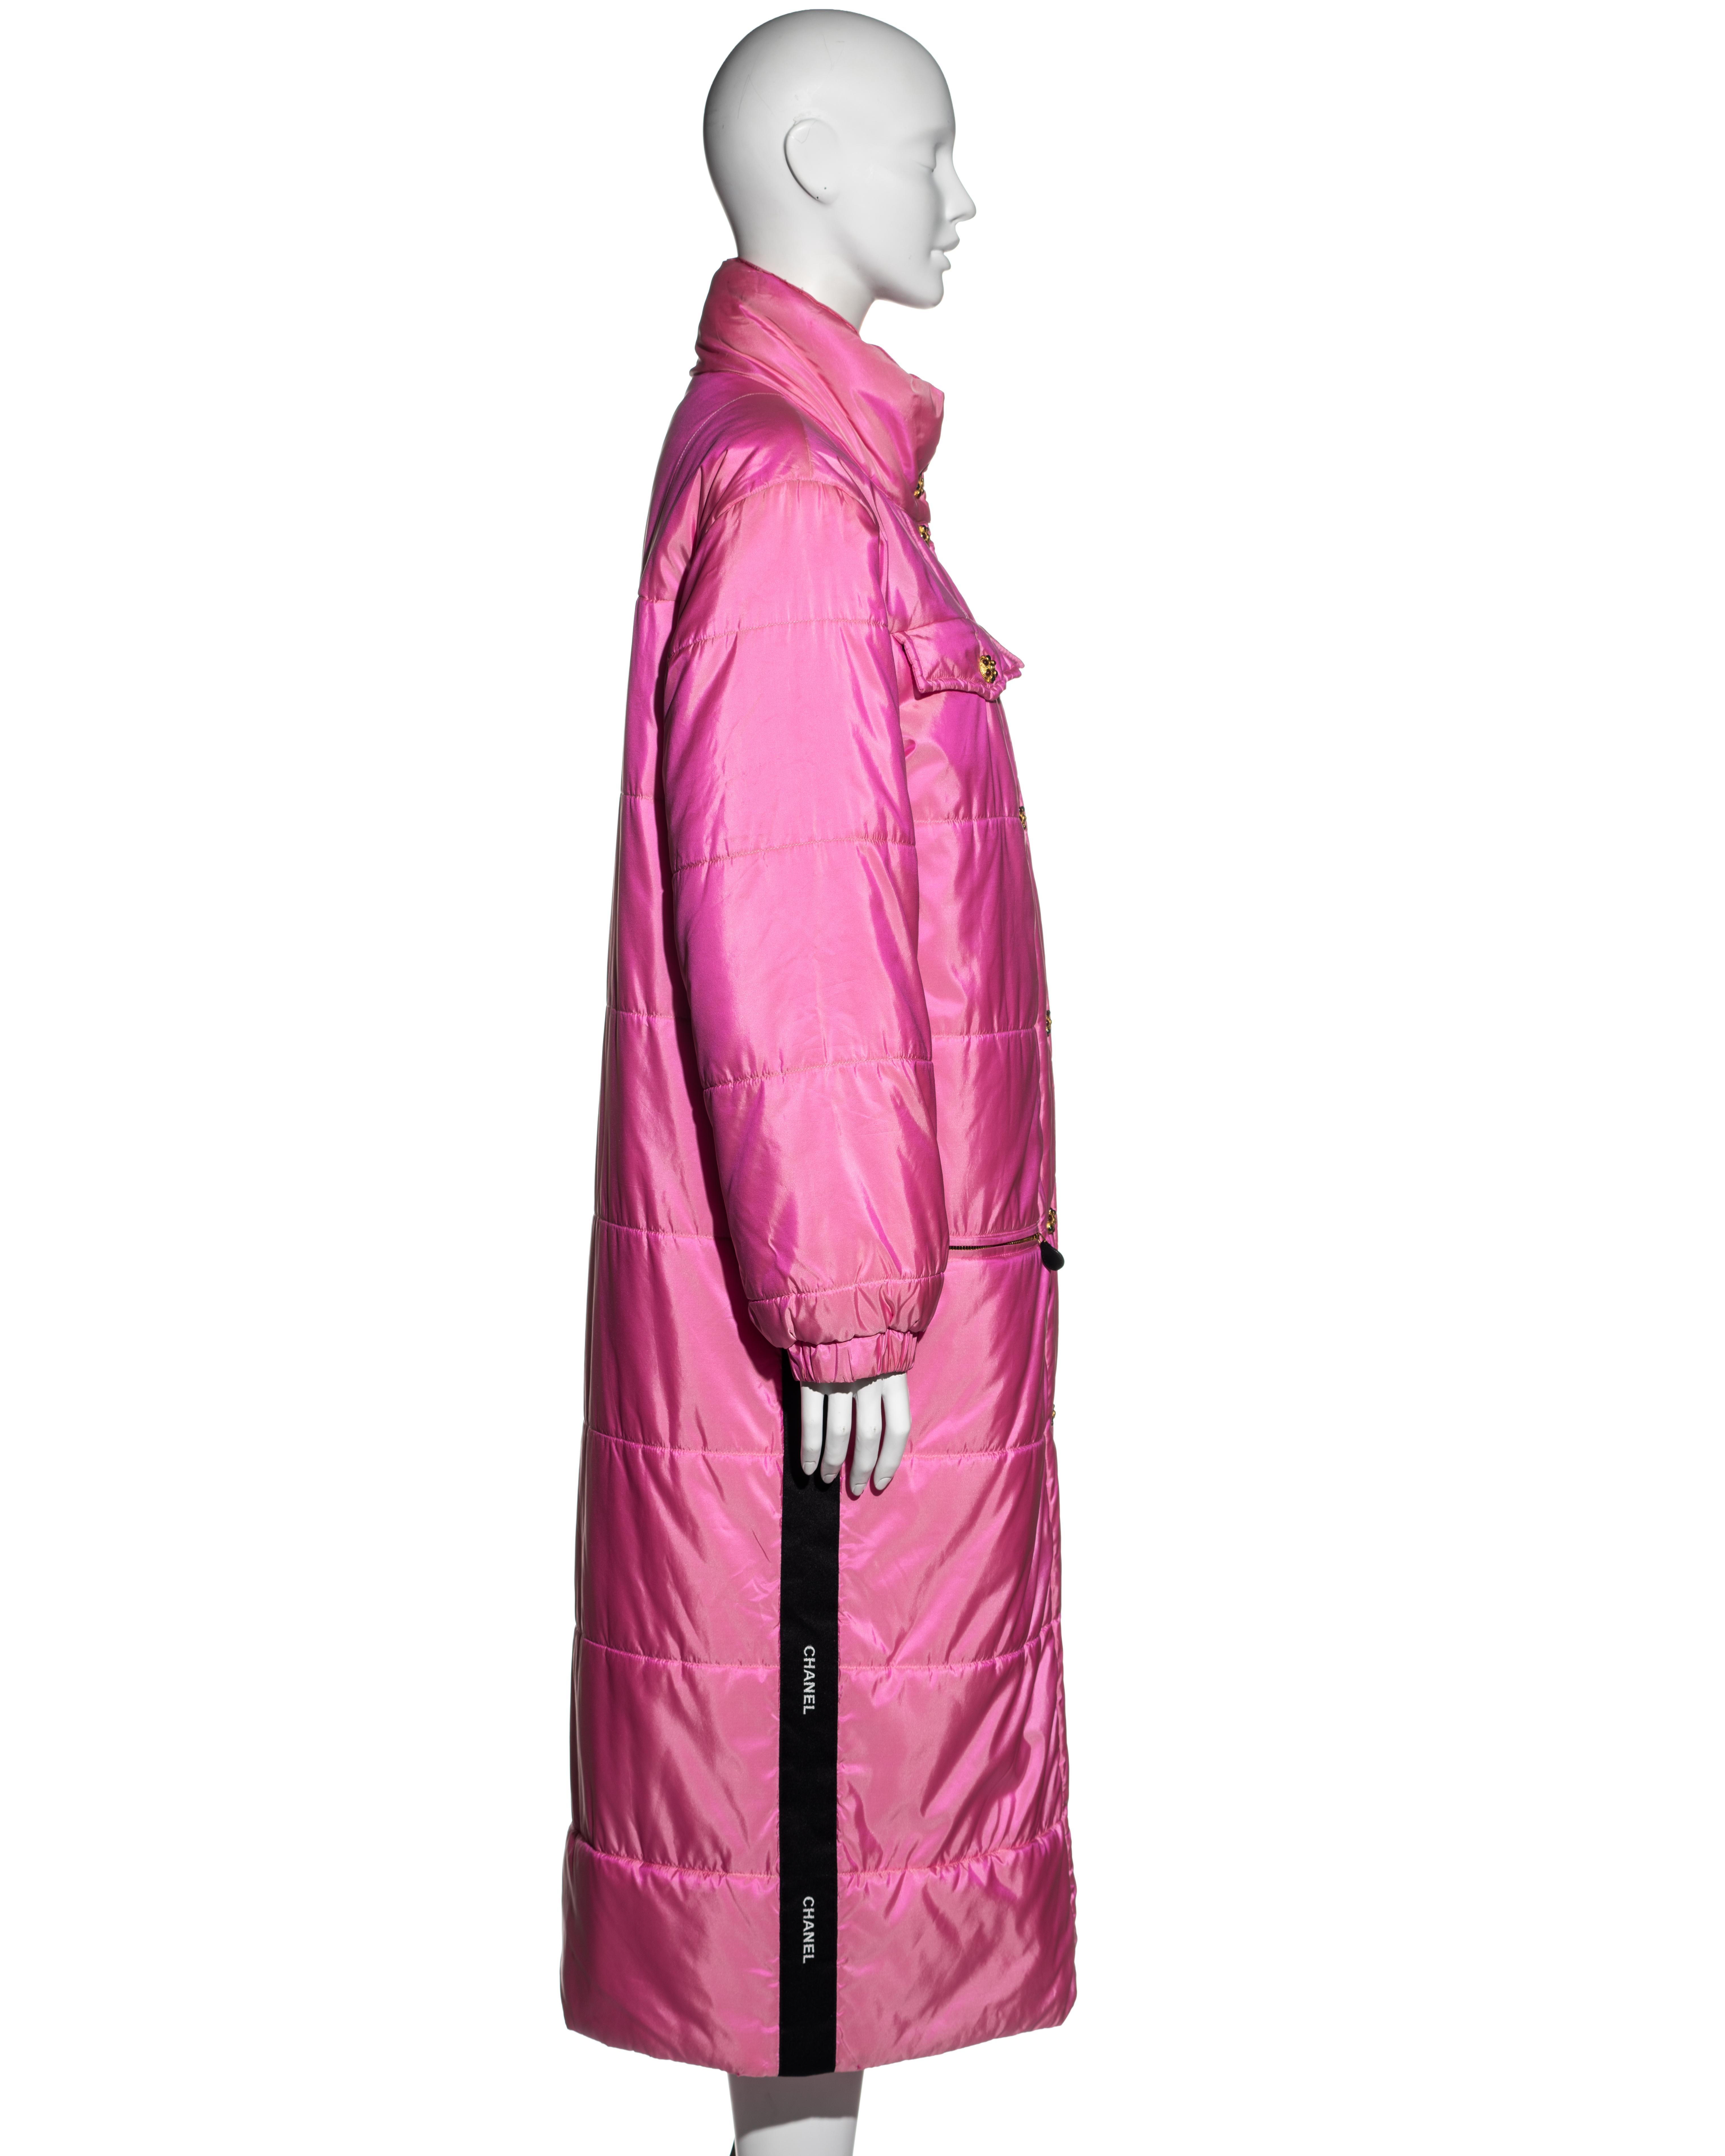 Chanel by Karl Lagerfeld pink silk puffer coat with Gripoix buttons, fw 1996 5